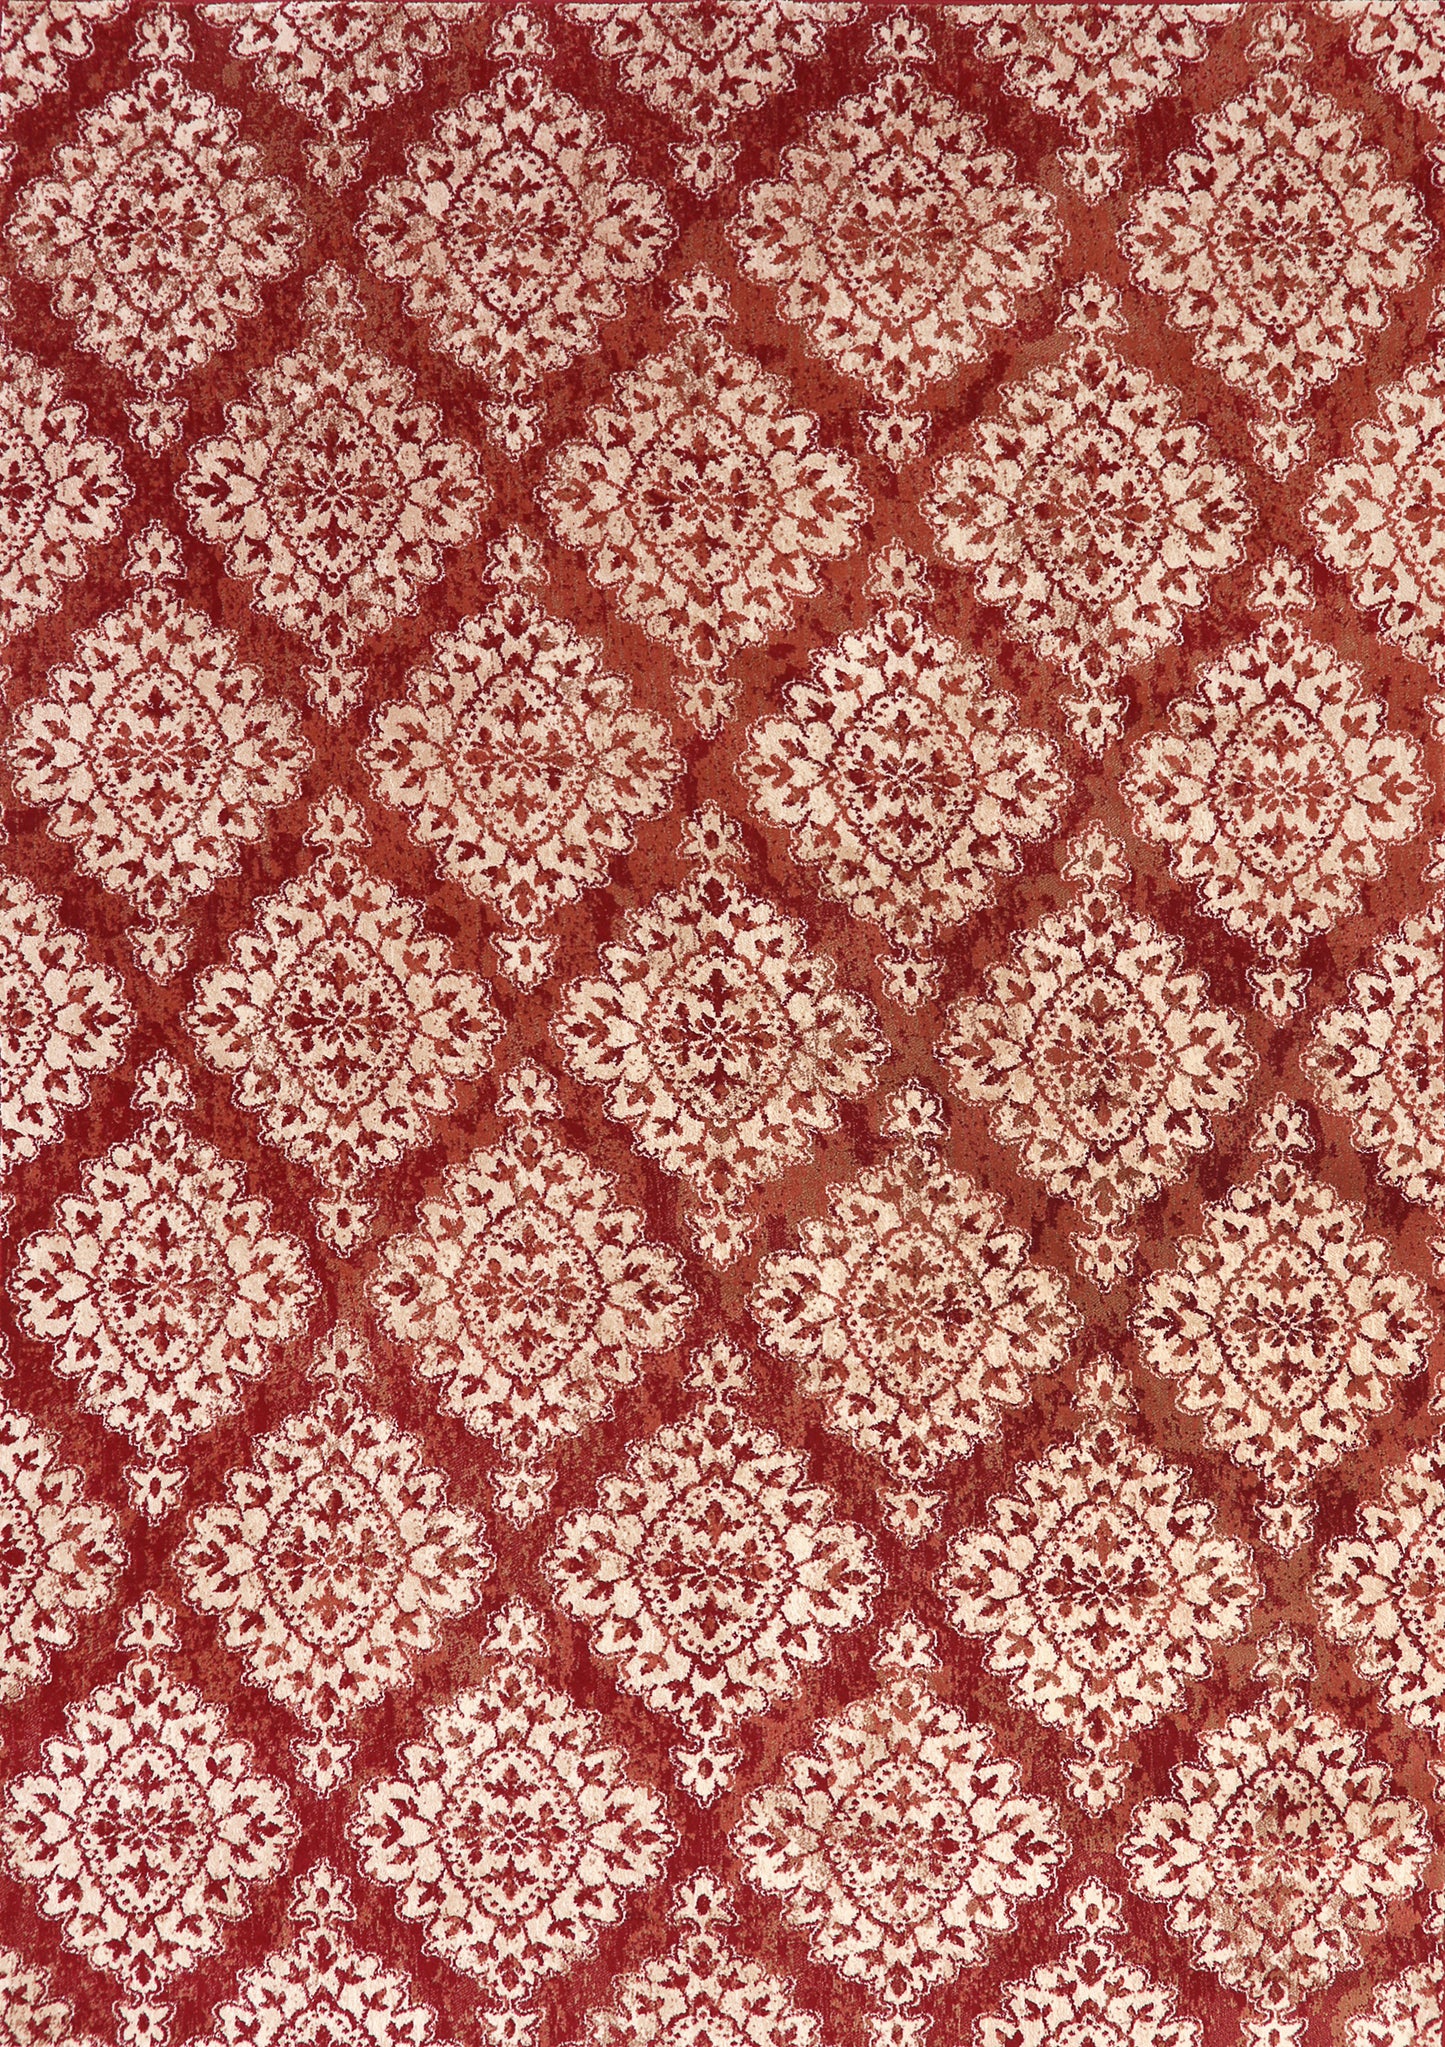 Melody 985015-619 Terracotta Area Rug